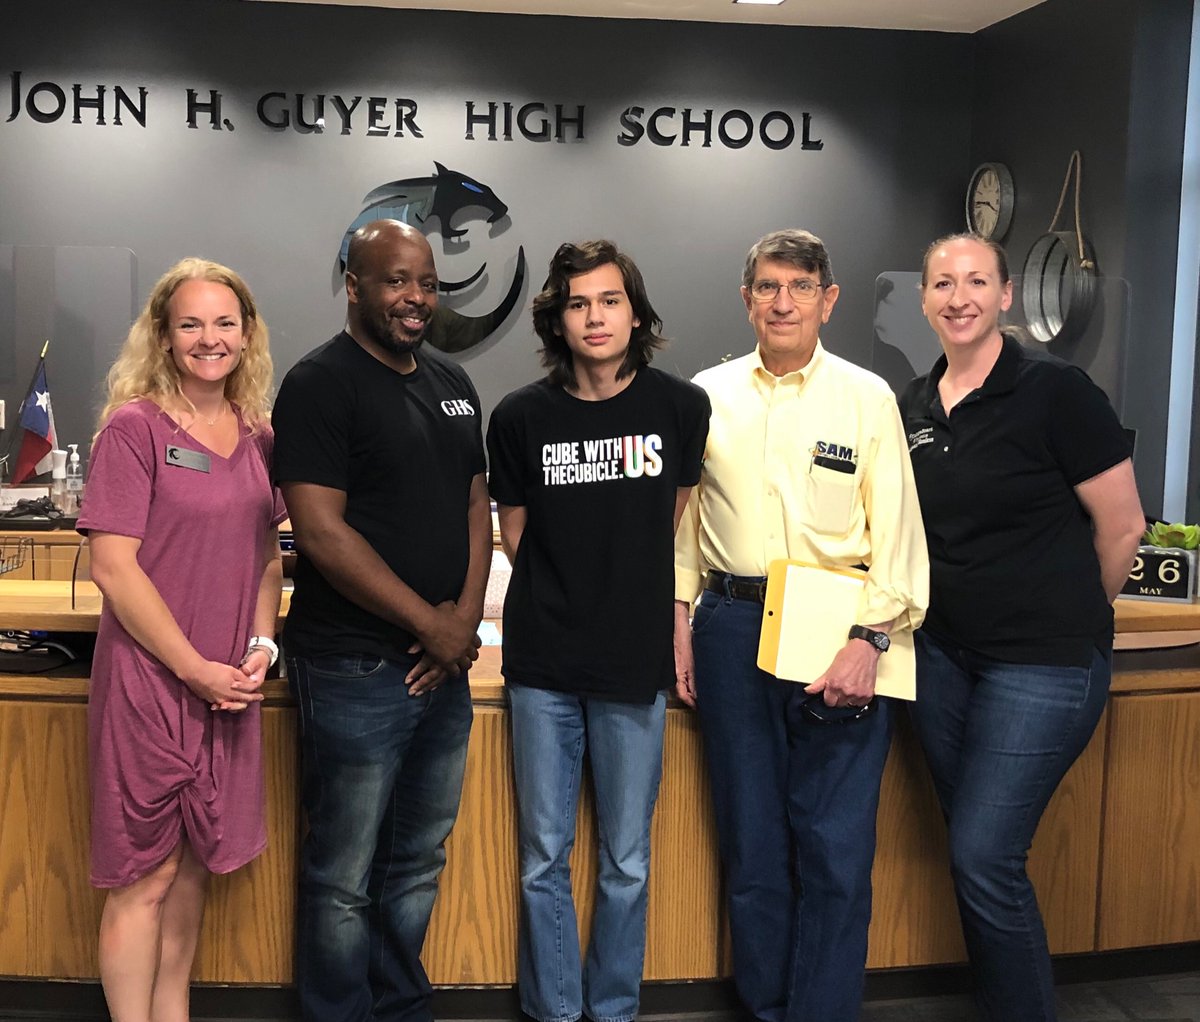 Congratulations to the Guyer Math Team President, Ethan Jones, who was named the Texas winner of the Trig*Star competition. Today he took the national exam. Proud of you! #TheGuyerWay @GHS_Wildcats @GHSPrincipalSPP @dentonisd